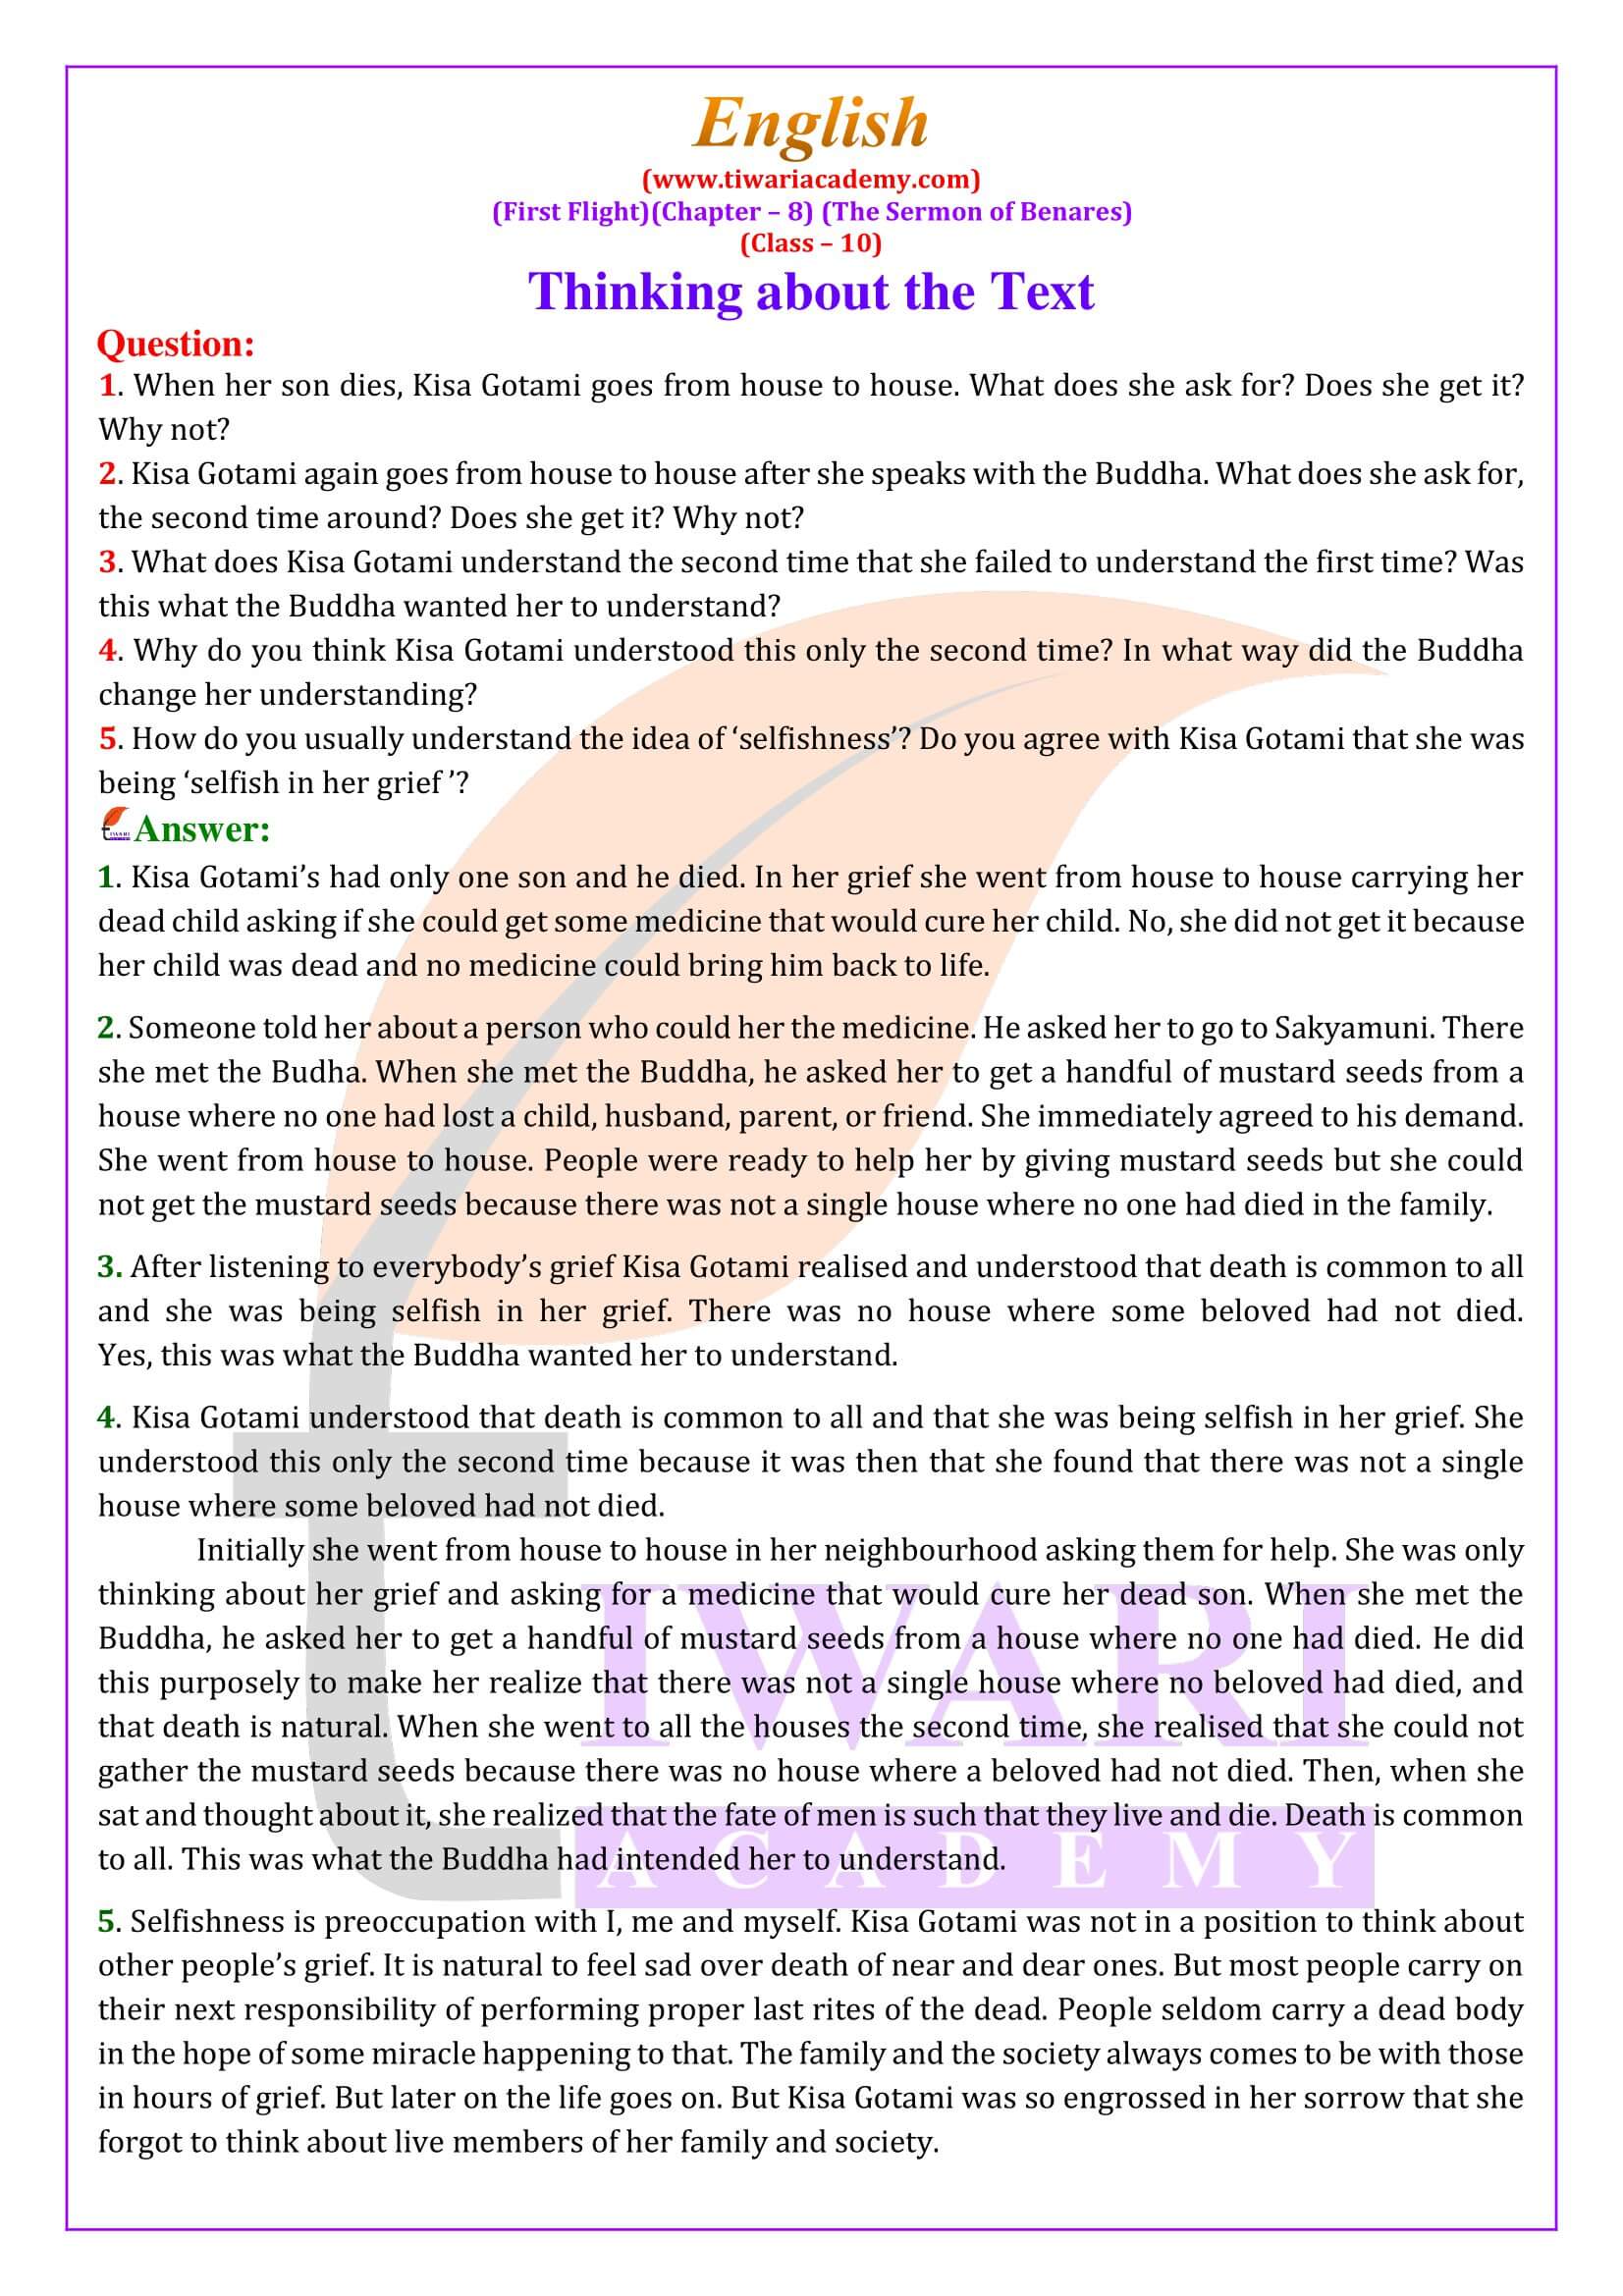 NCERT Solutions for Class 10 English First Flight Chapter 8 The Sermon of Benares